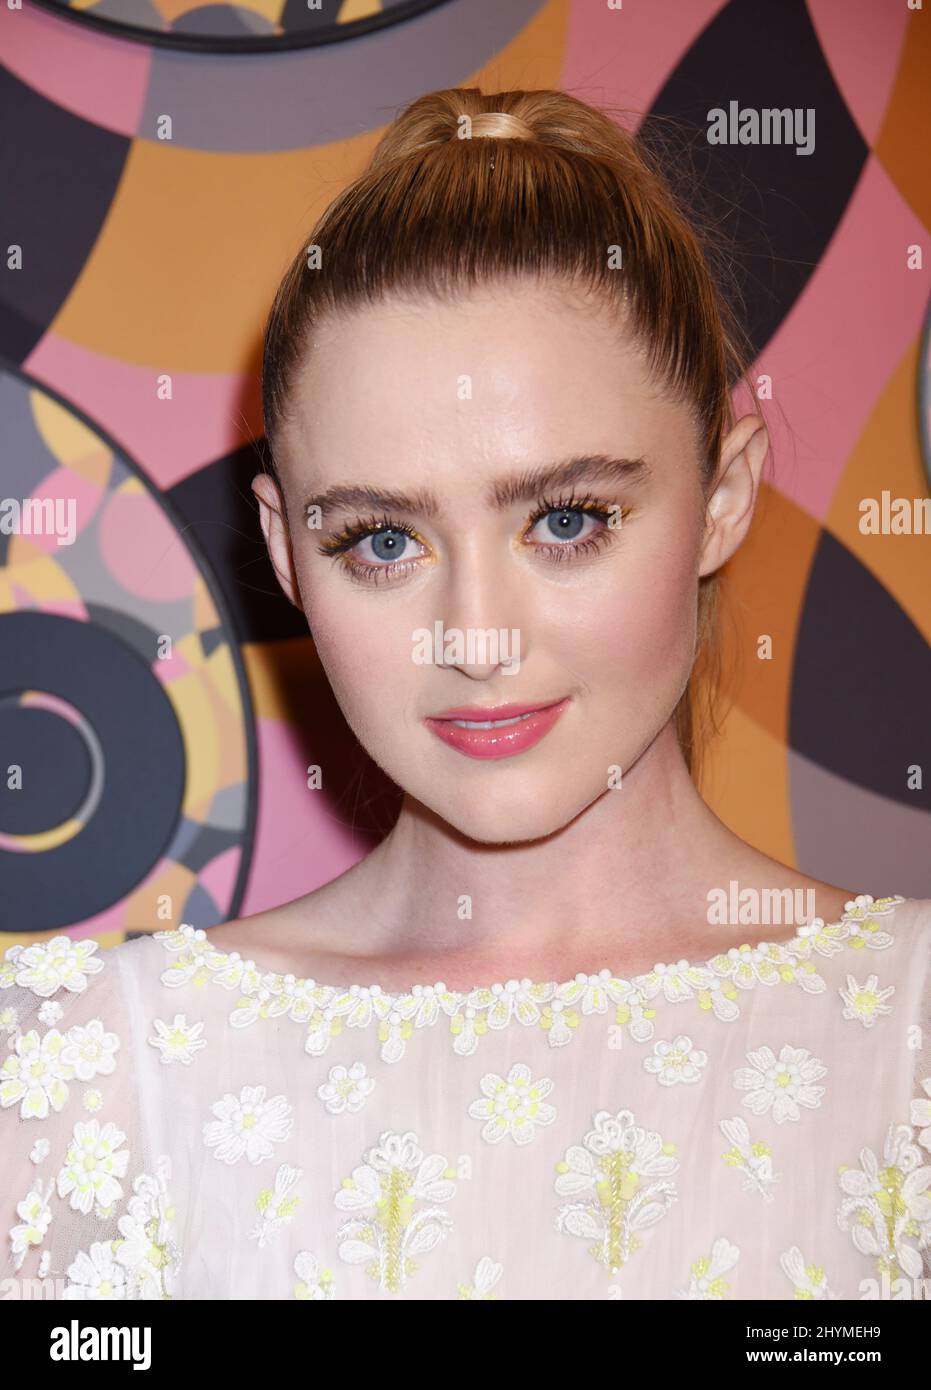 Kathryn Newton at HBO's Golden Globes Afterparty held at the Beverly Hilton Hotel on January 5, 2020 in Beverly Hills, Los Angeles. Stock Photo